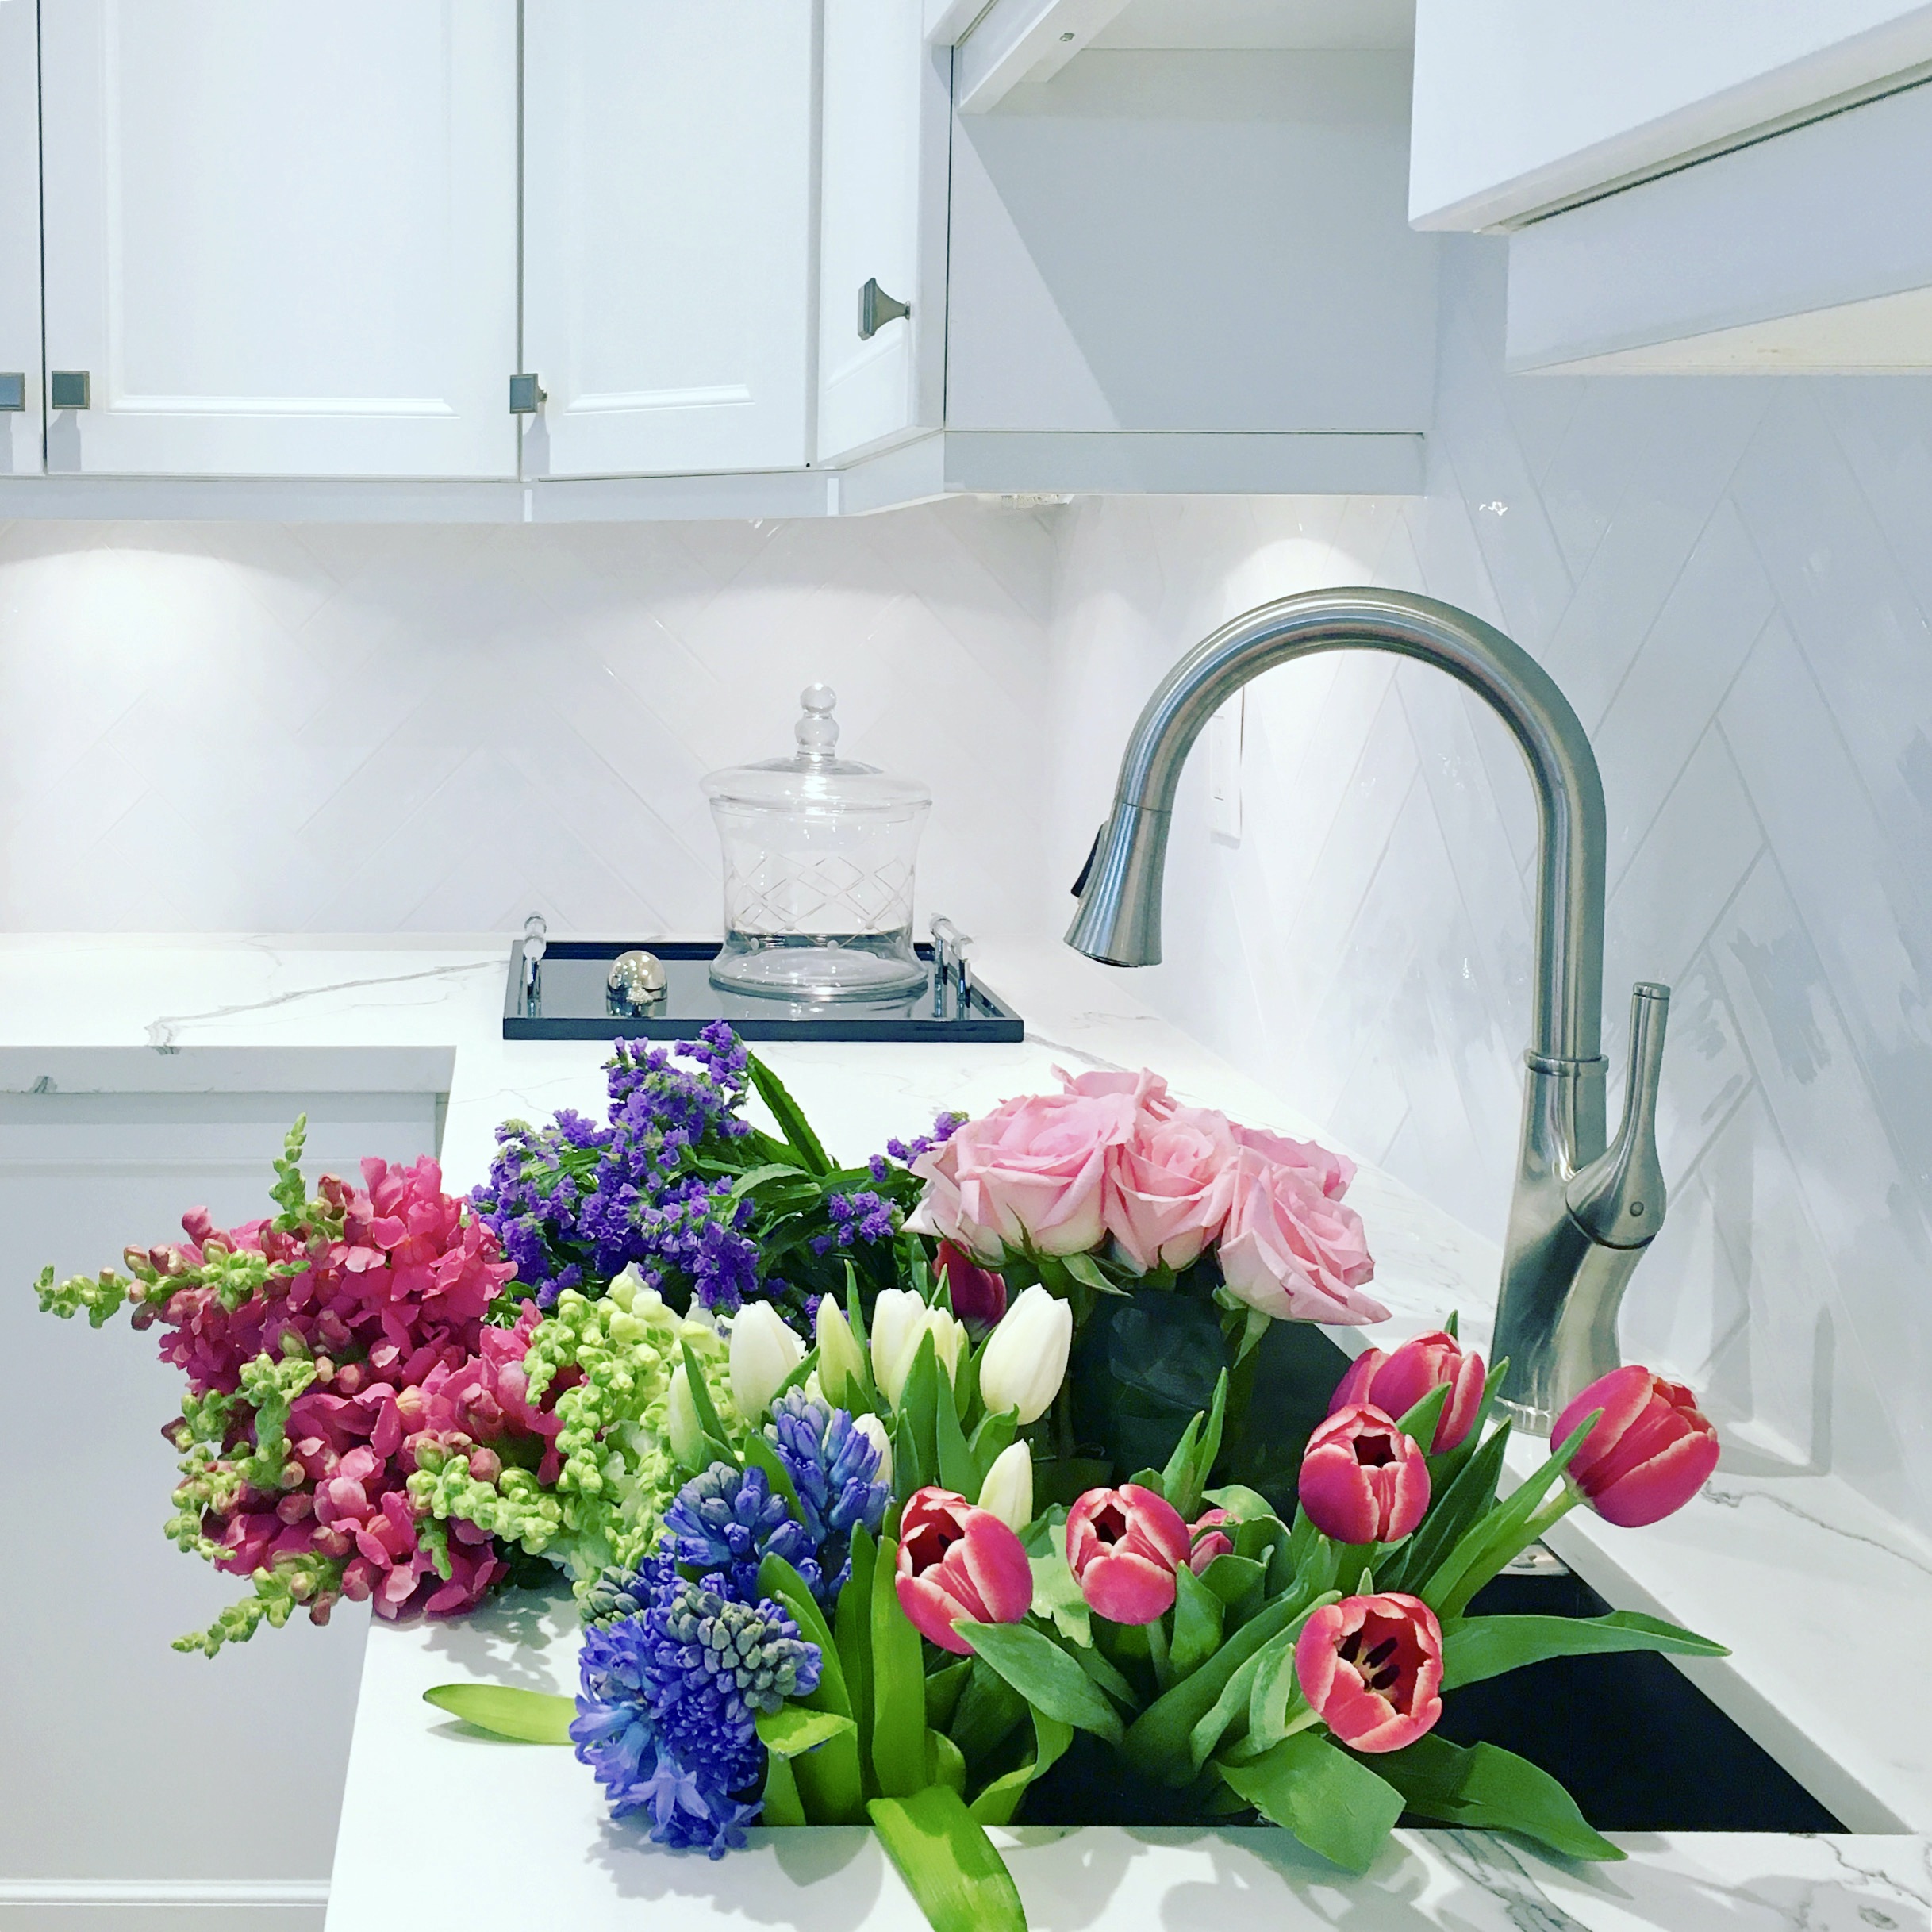 Kitchen interior designed by Fernanda Cunha Interiors, featuring white cabinets and showing a sink full of various colourful flowers